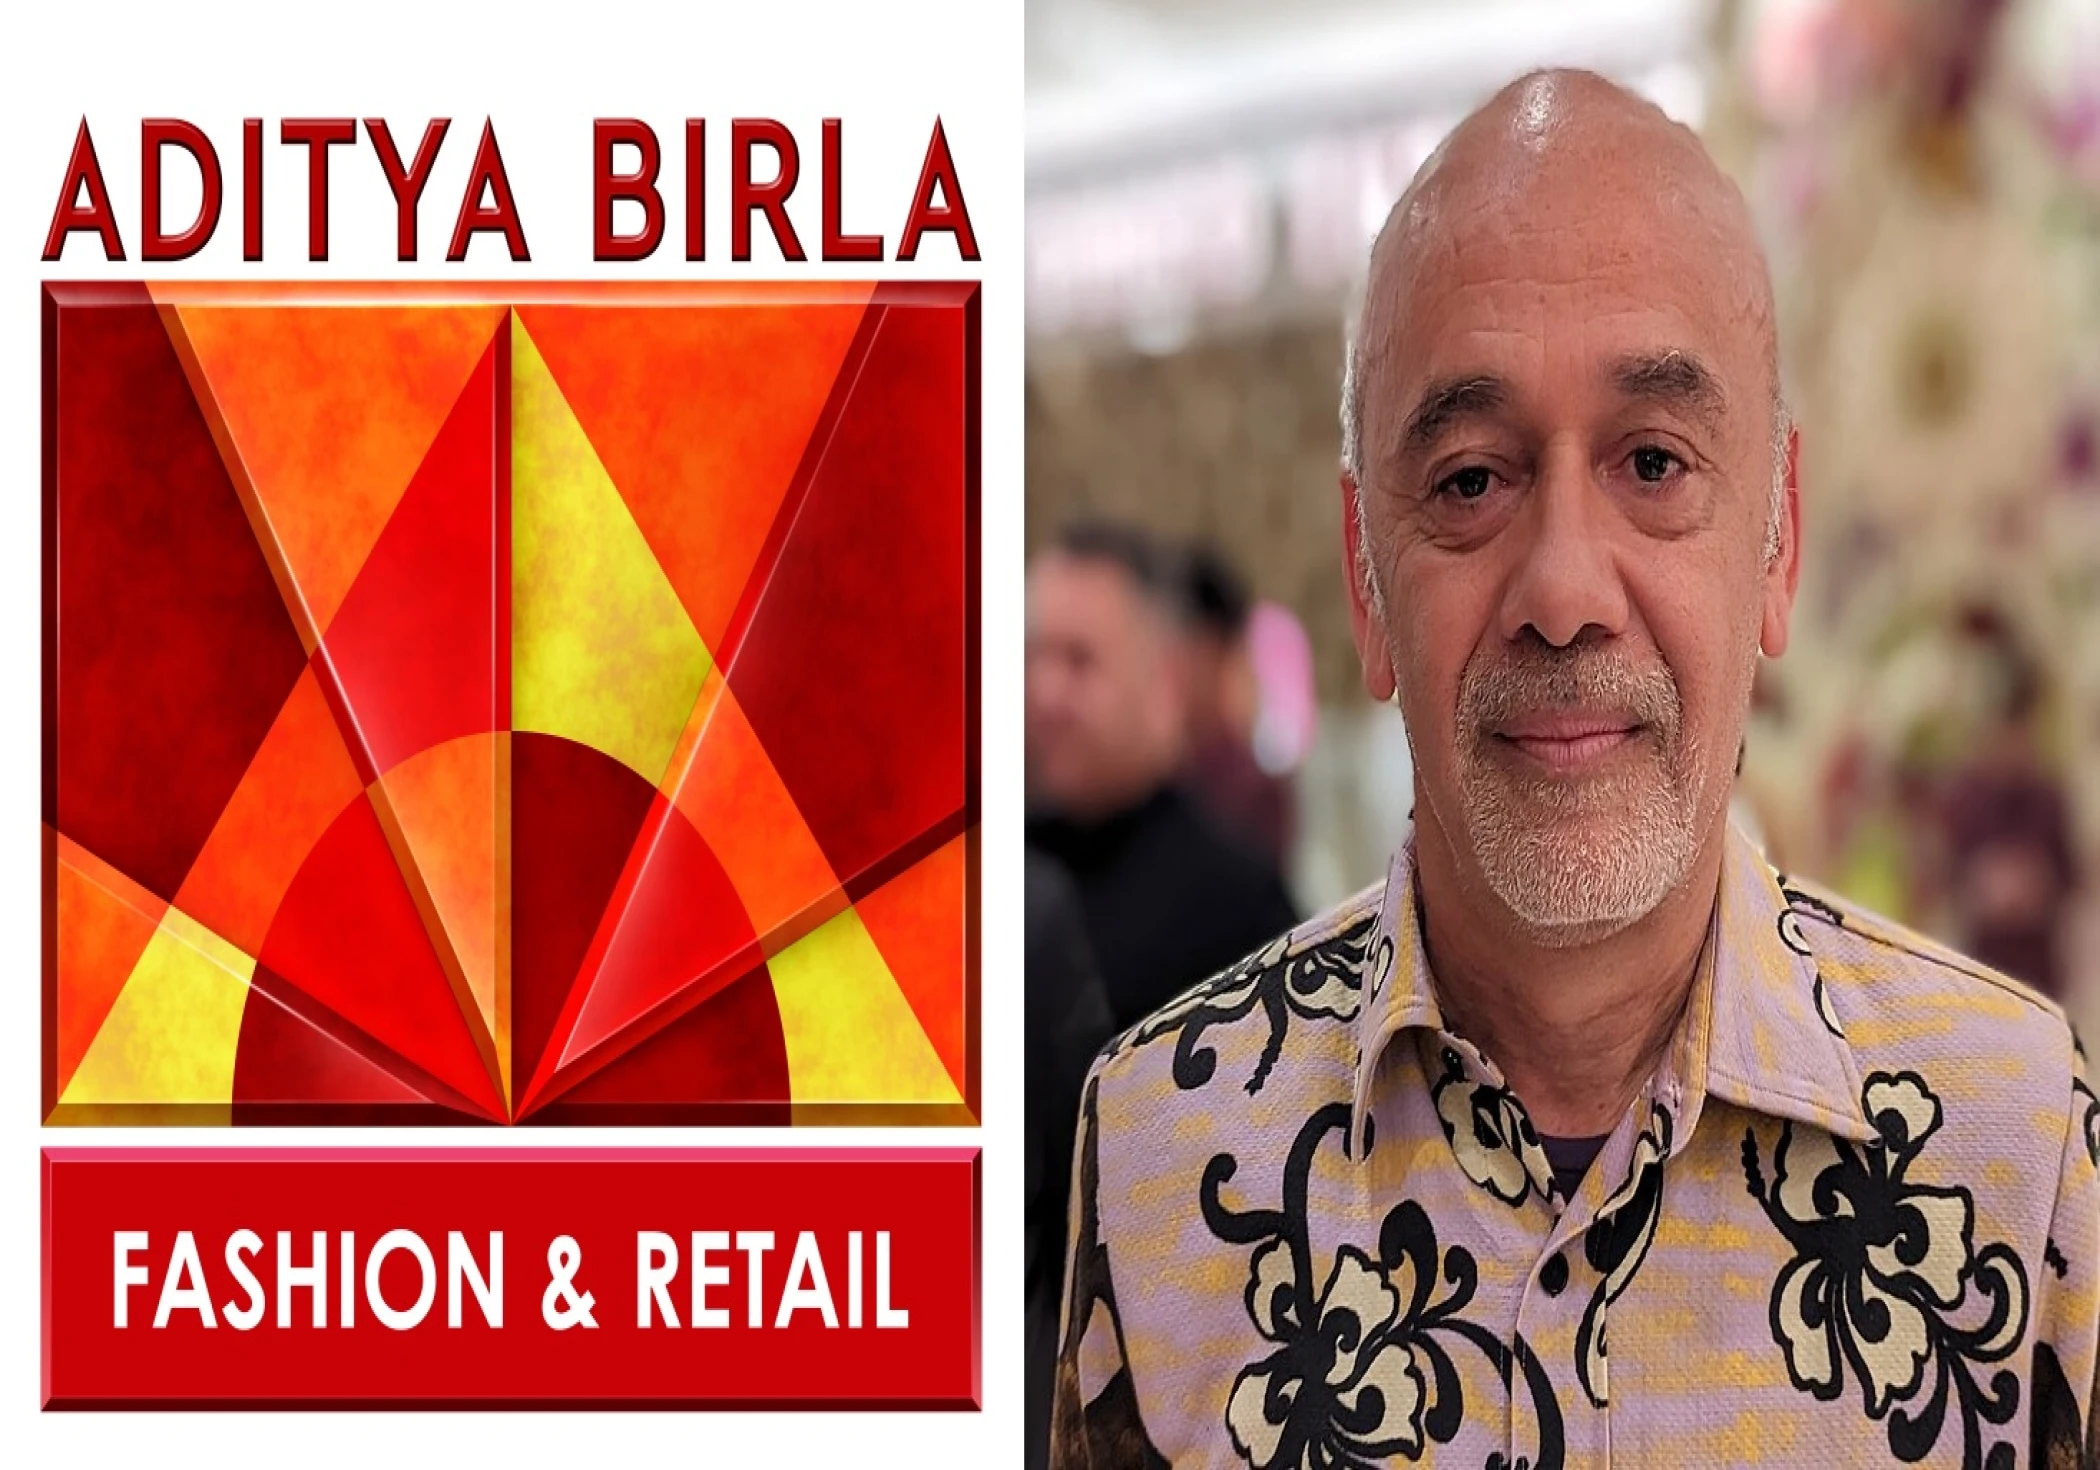 Christian Loboutin has announced a joint venture partnership in India with Aditya Birla Fashion and Retail Limited